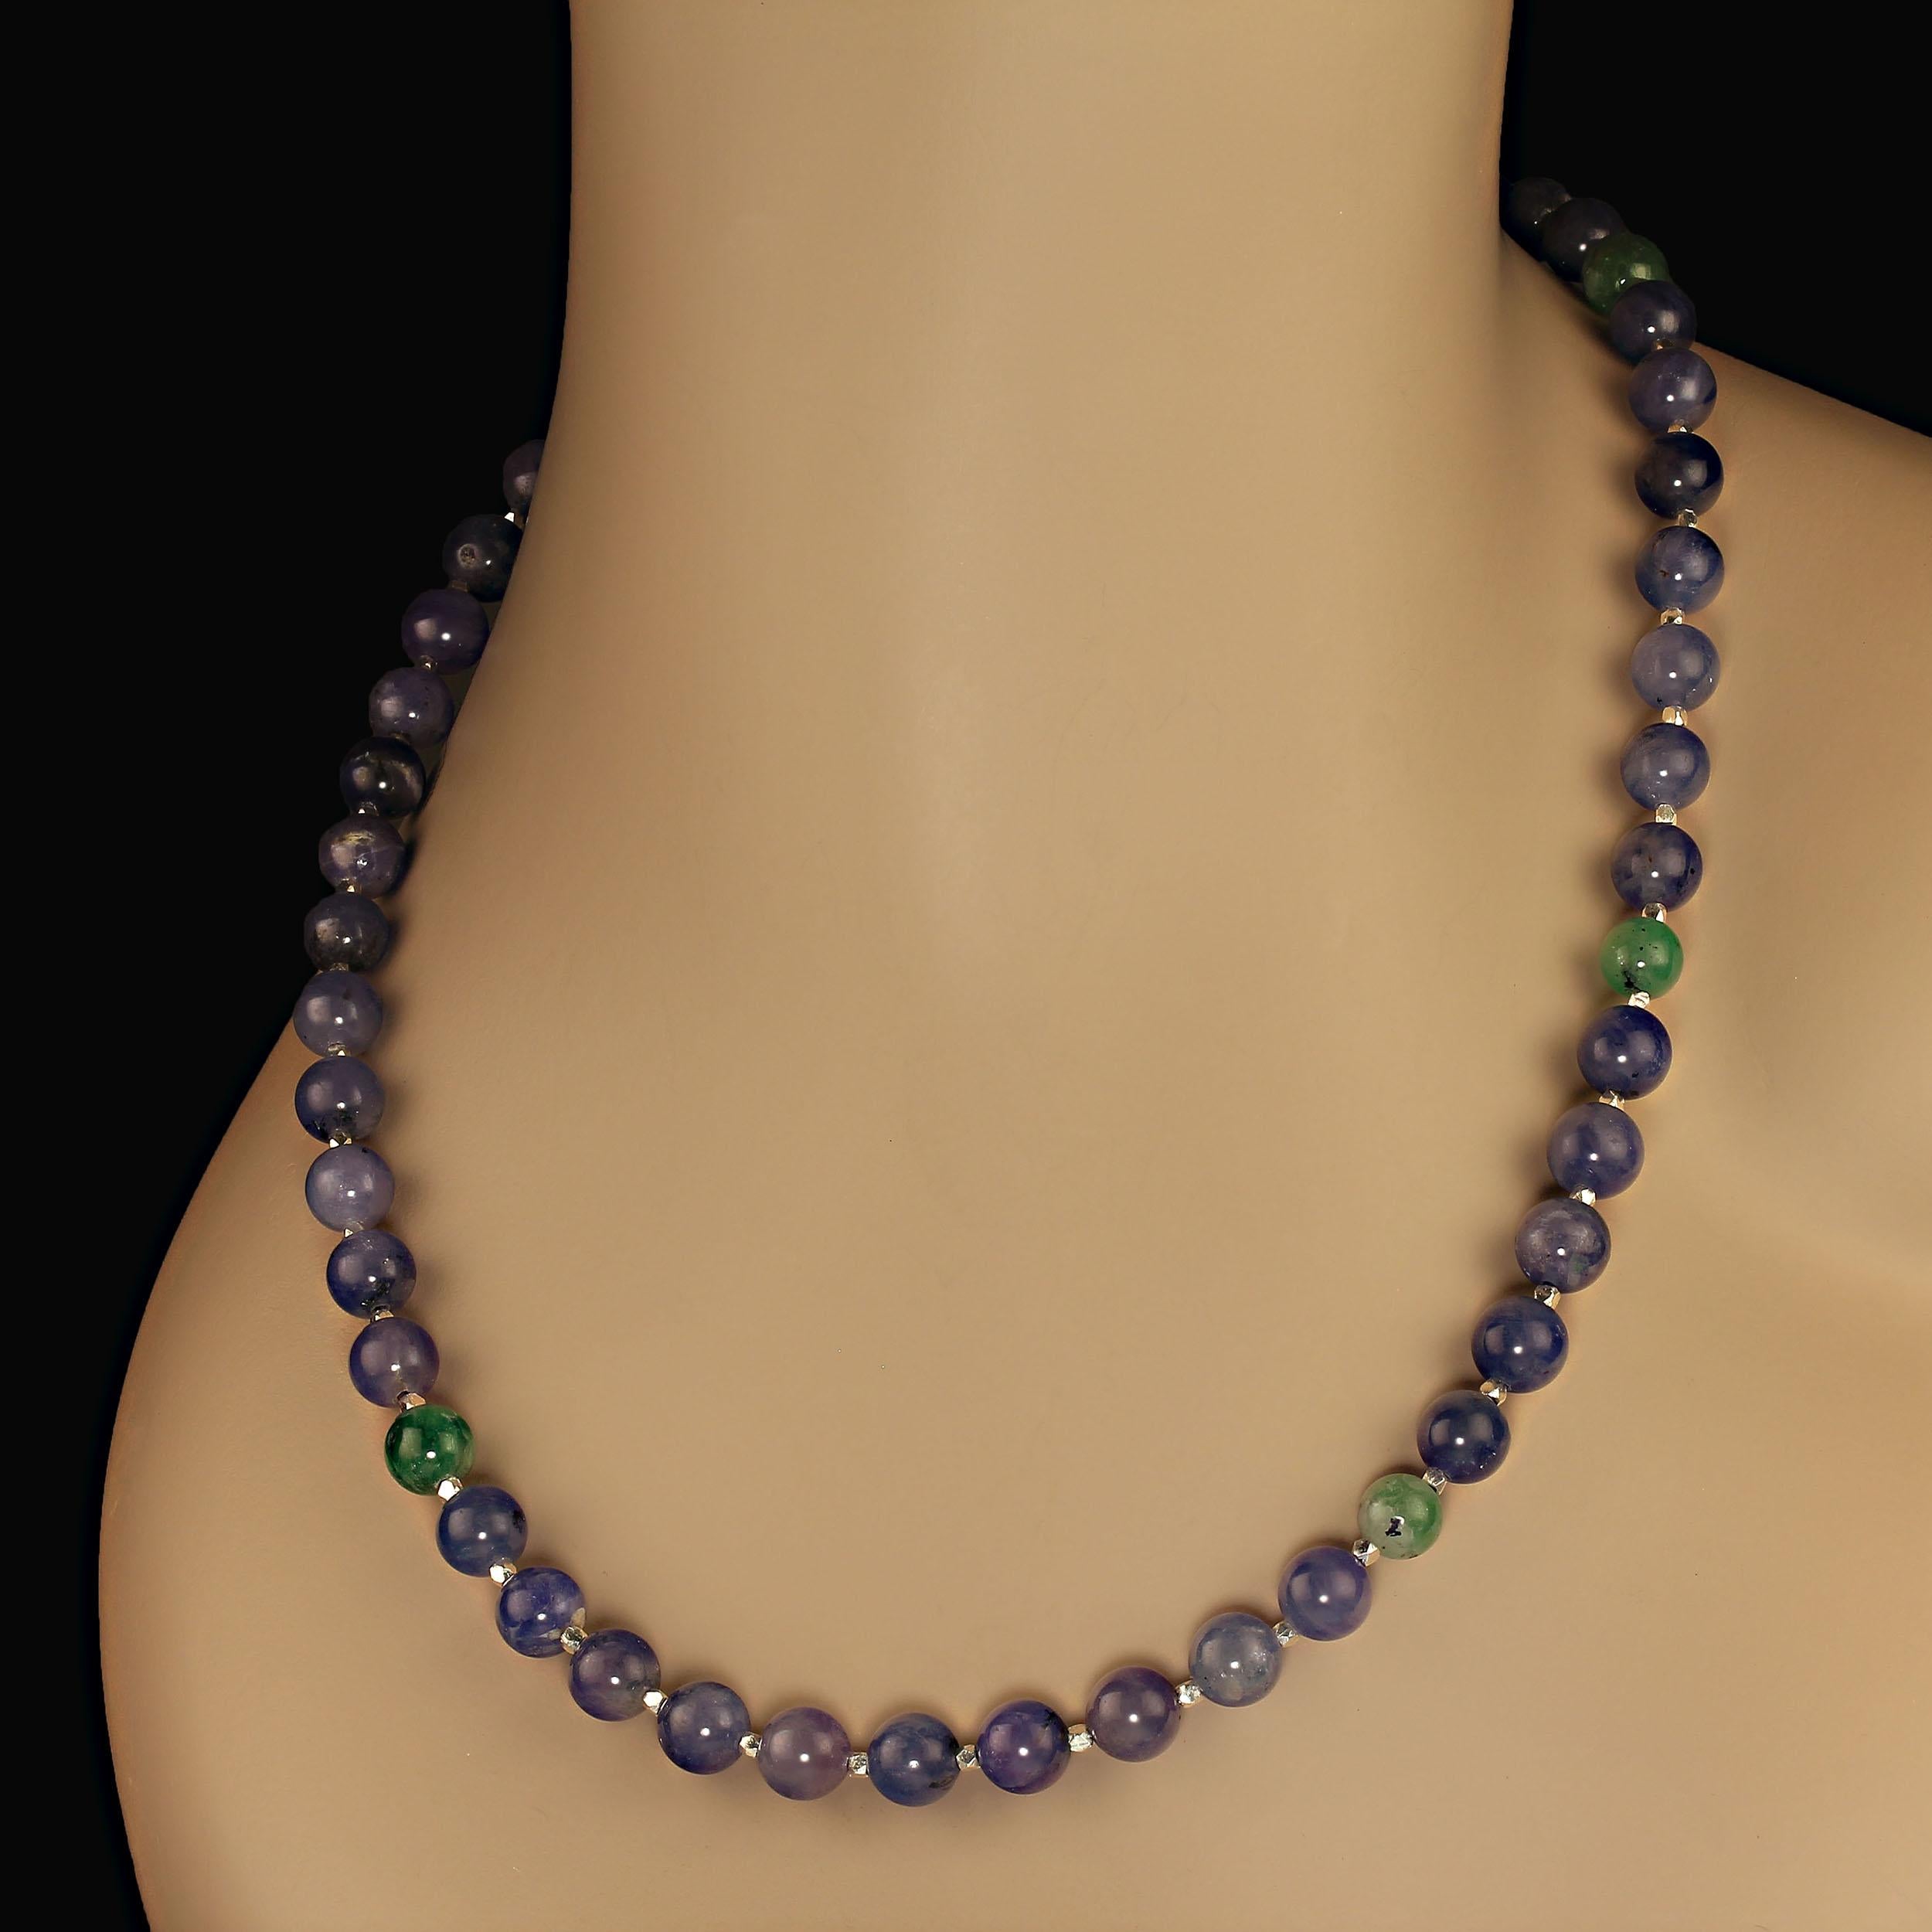 Artisan AJD 20 Inch Unique Translucent Tanzanite and Fine Silver necklace  Great Gift! For Sale